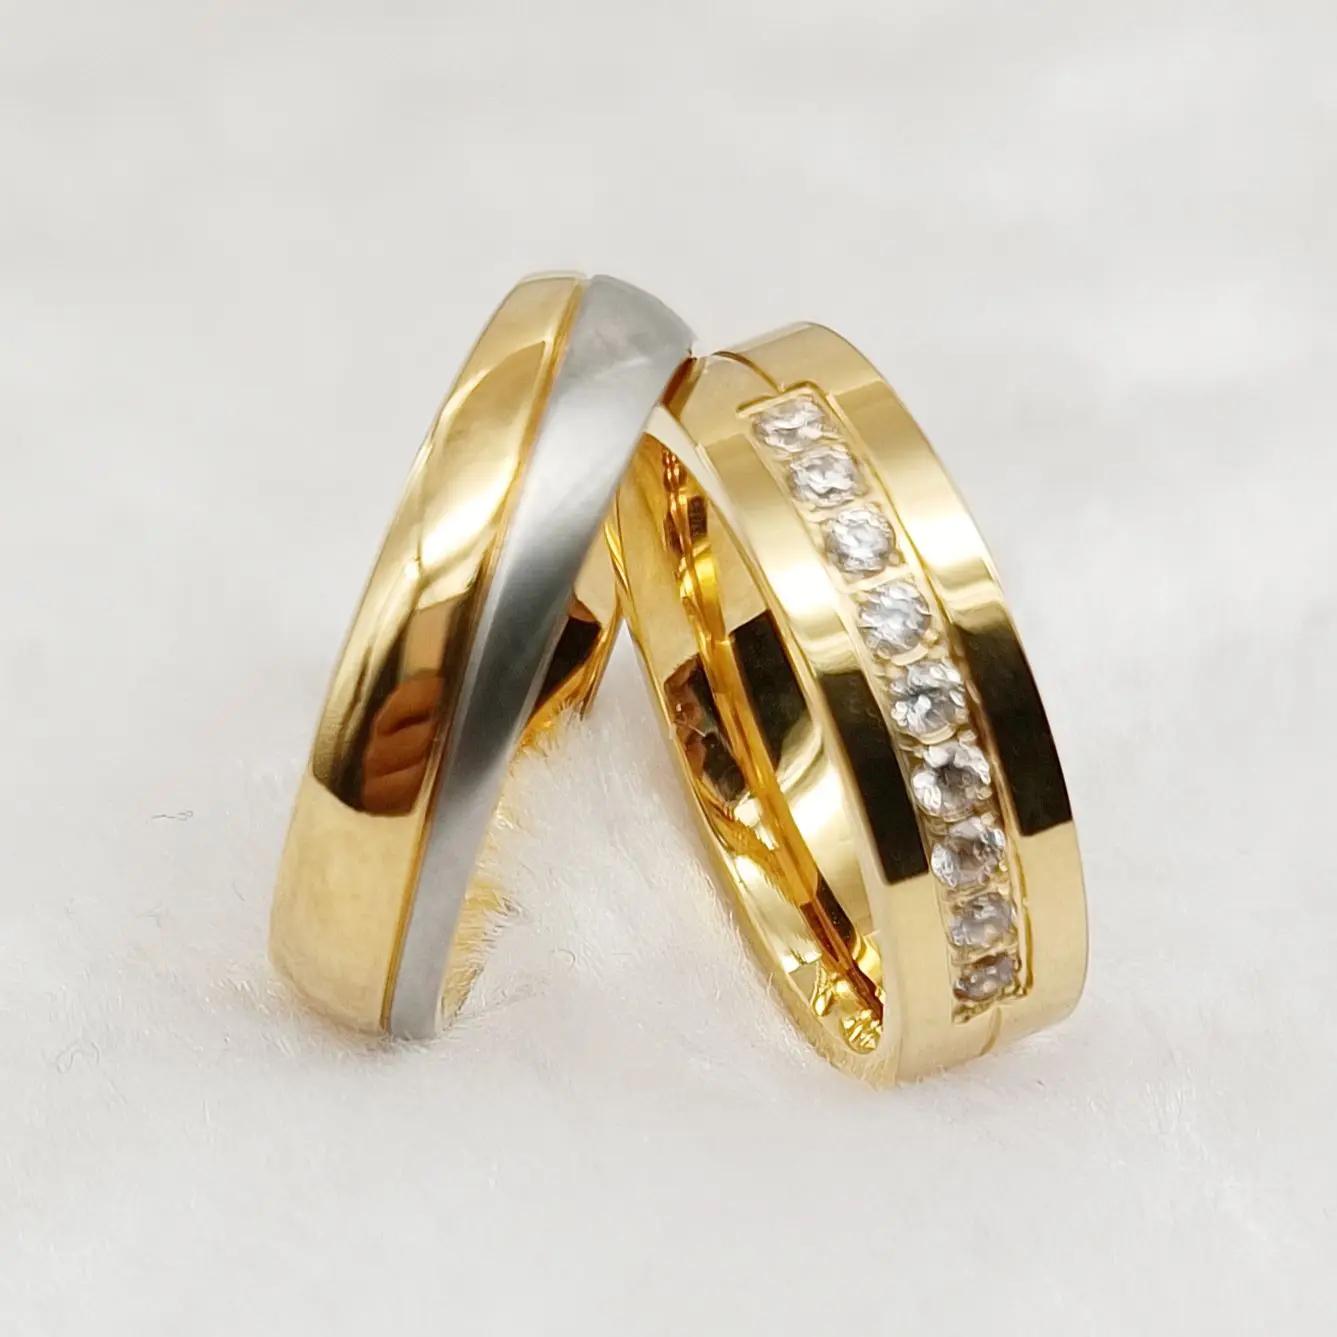 High Quality Designer Matching Marriage Lovers Jewelry Rings set men and women 18k gold plated Promise wedding rings